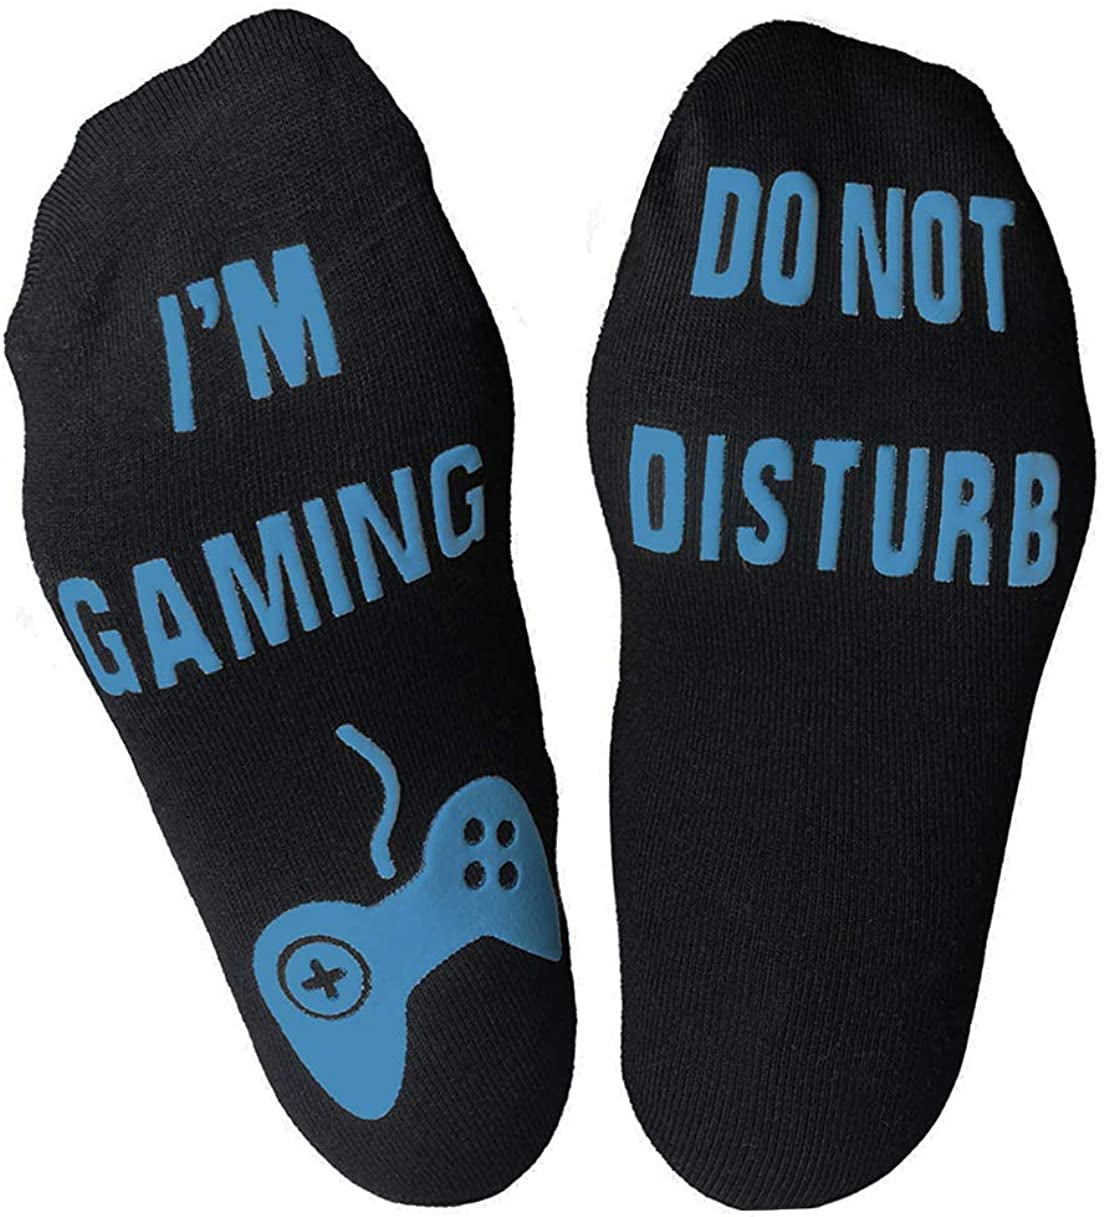  Gifts for Dad,Novelty Gaming Socks Fathers Day Gift from Son,Funny Socks Gift Stocking Stuffers for Men,Dad,Teens